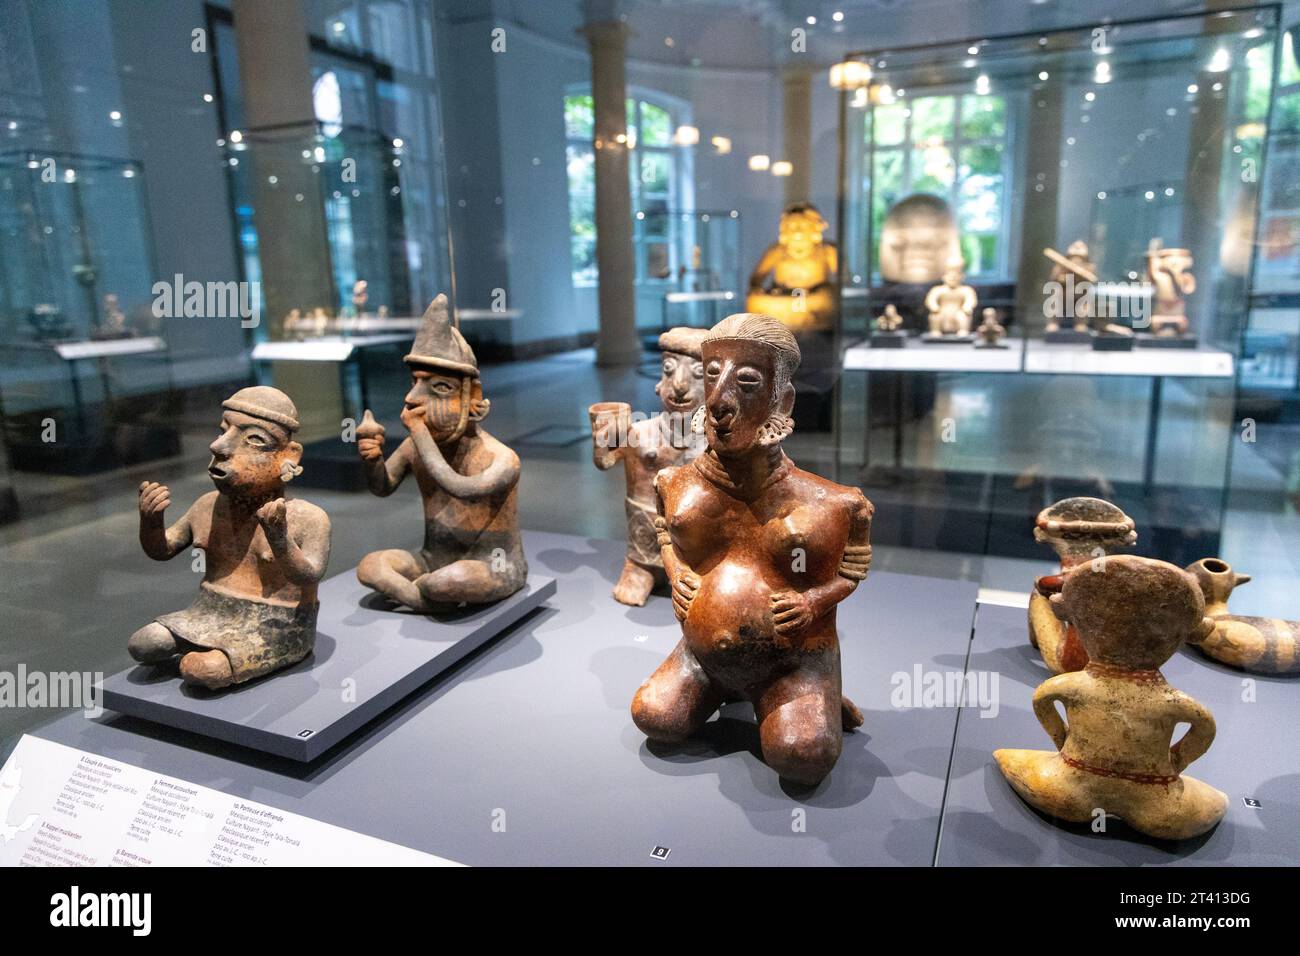 Ancient Mexico Nayarit culture terracotta statuettes on display, Royal Museums of Art and History, Brussels, Belgium Stock Photo